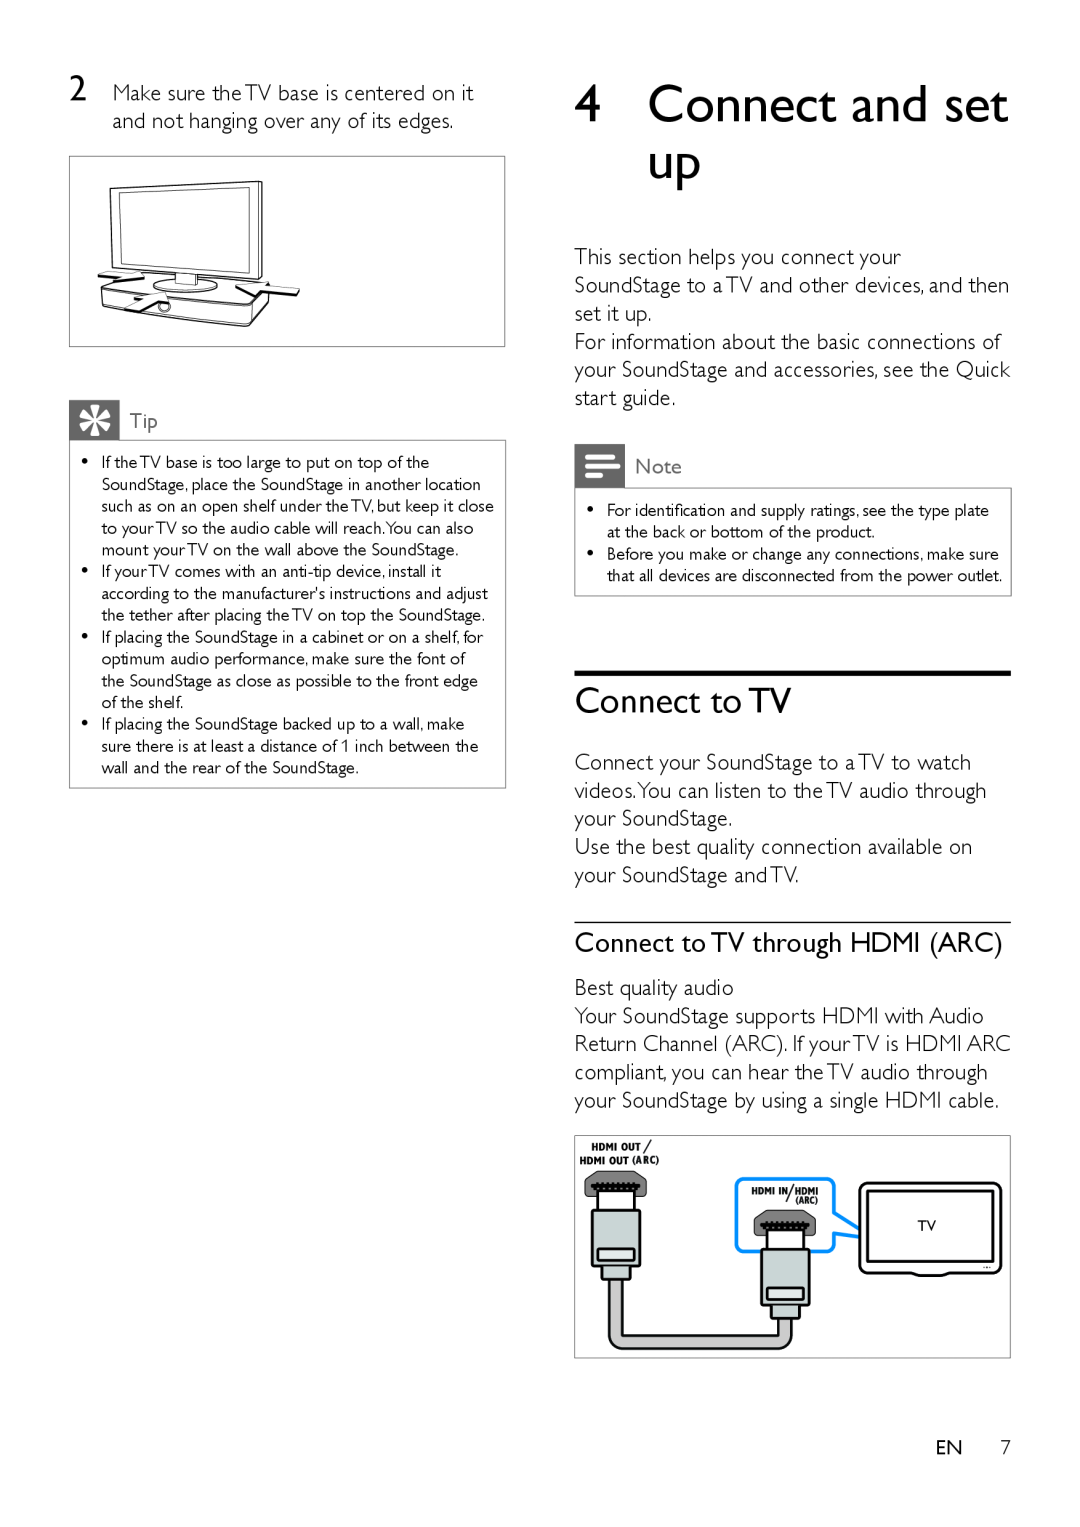 Philips HTL4110B user manual 4Connect and set up, Connect to TV 